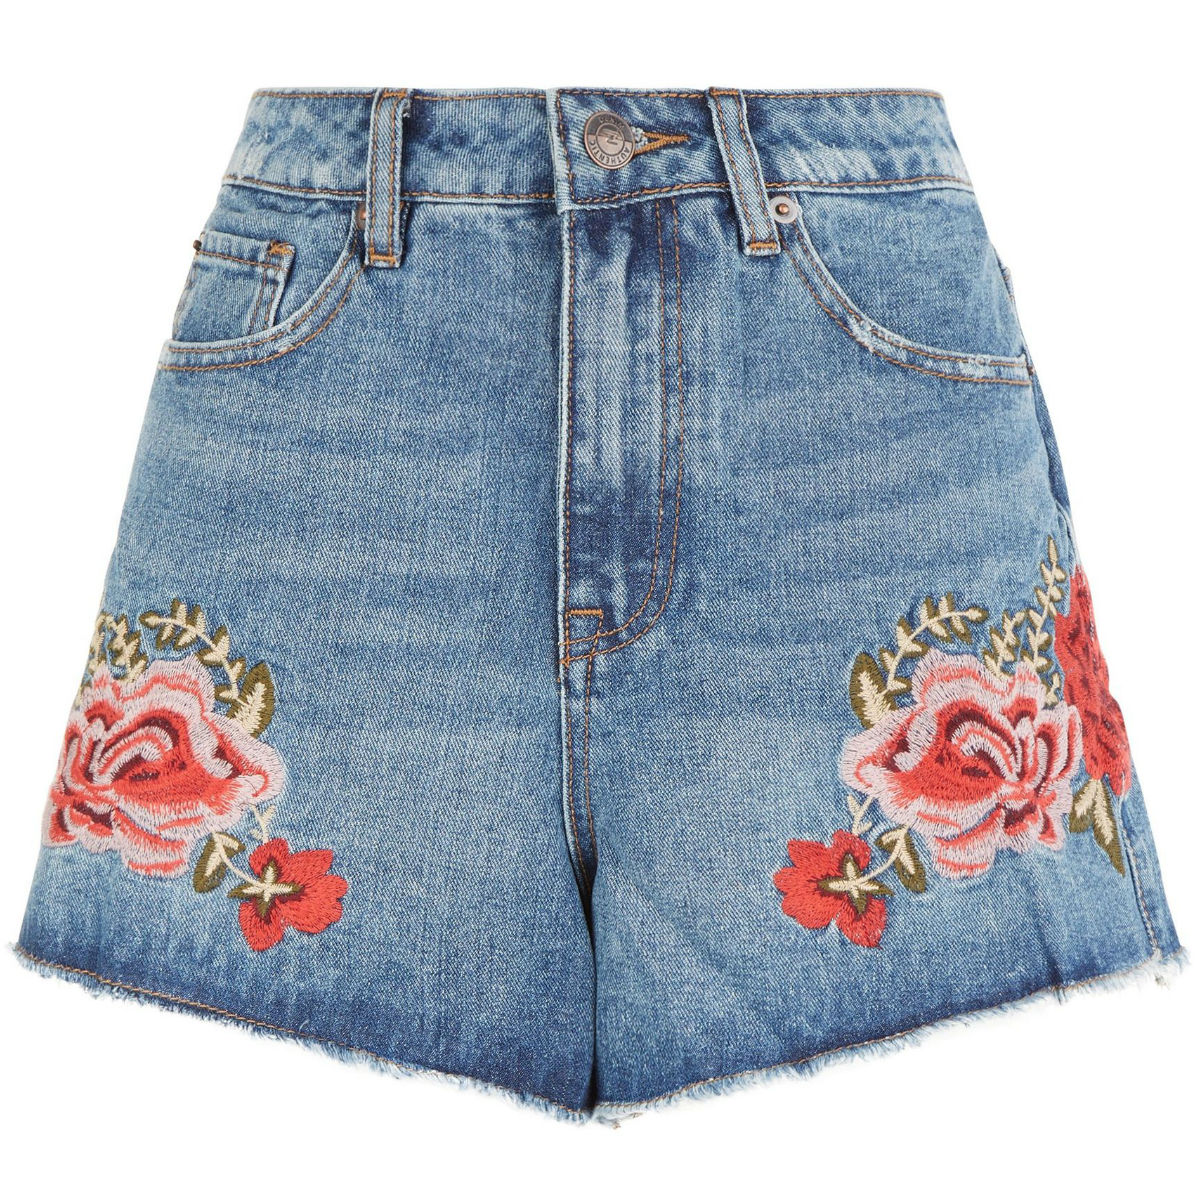 Blue rose embroidered denim mom shorts, £22, New Look